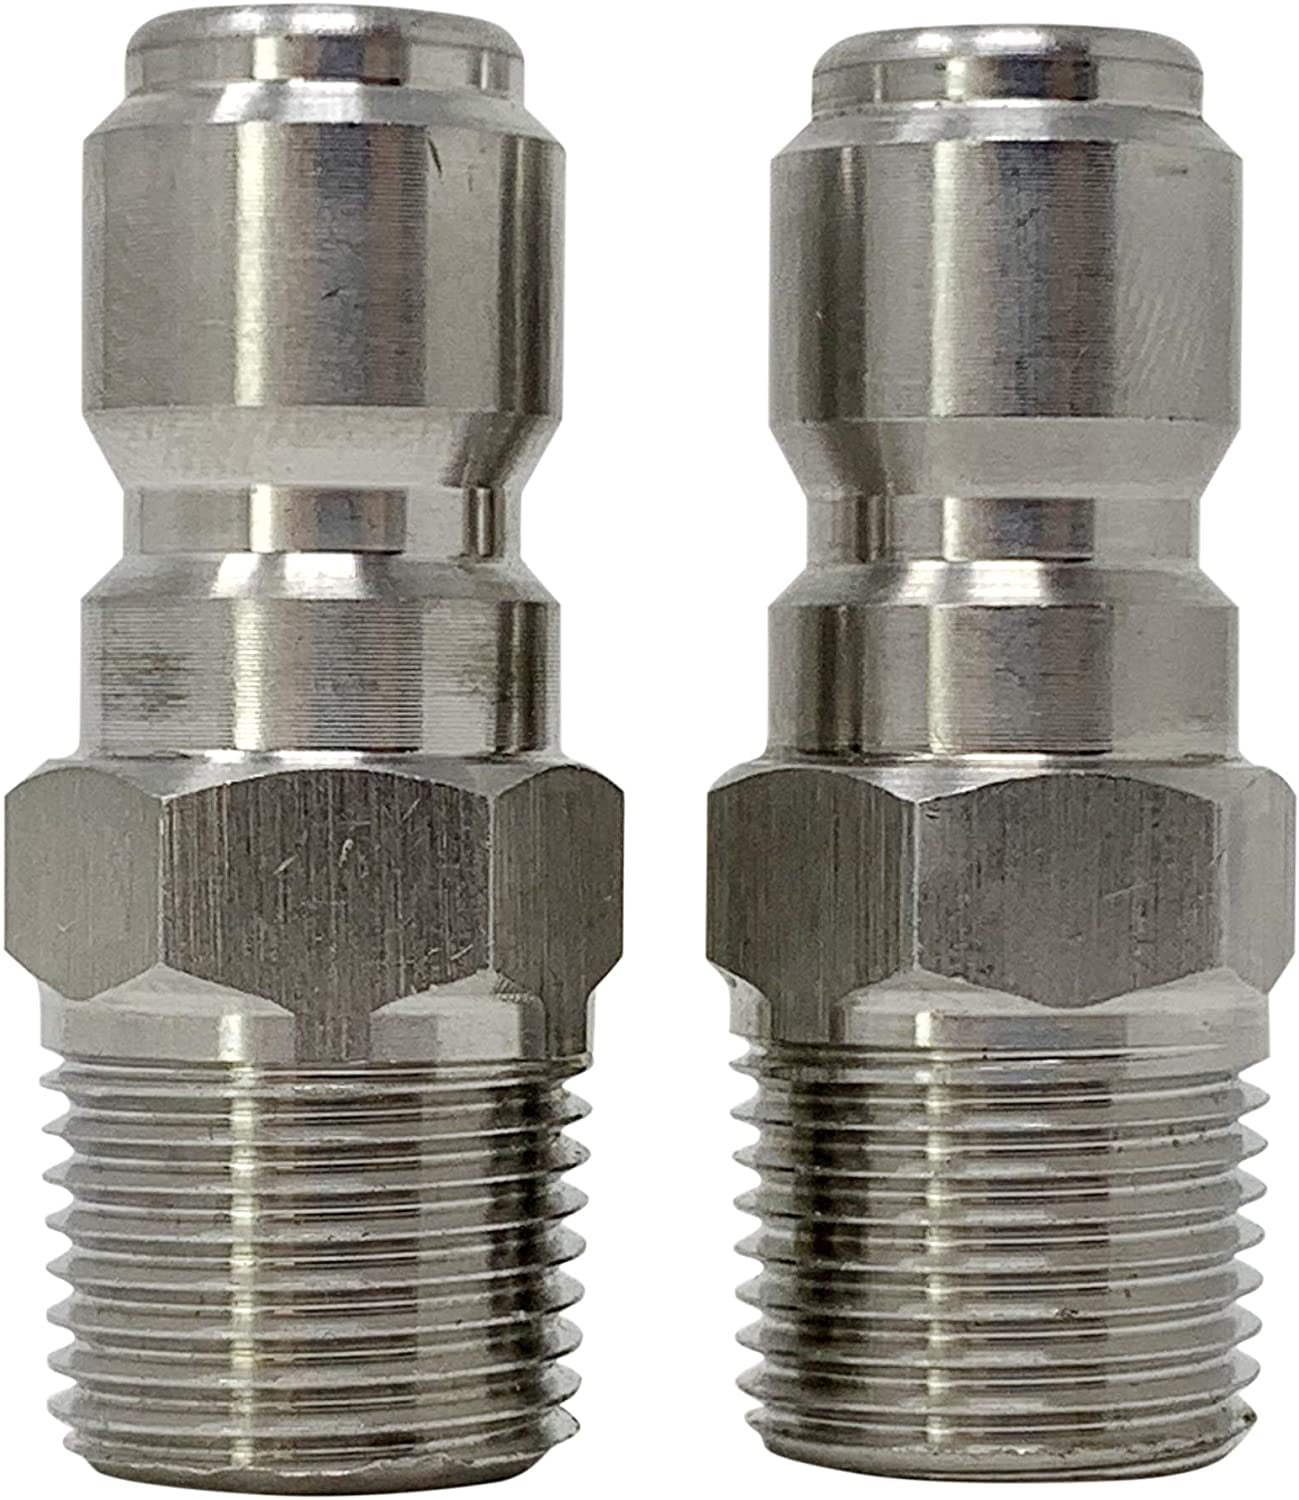 Stainless Steel 1/2 NPT Size Female Quick Connect Nipple Plug Coupler Connection 